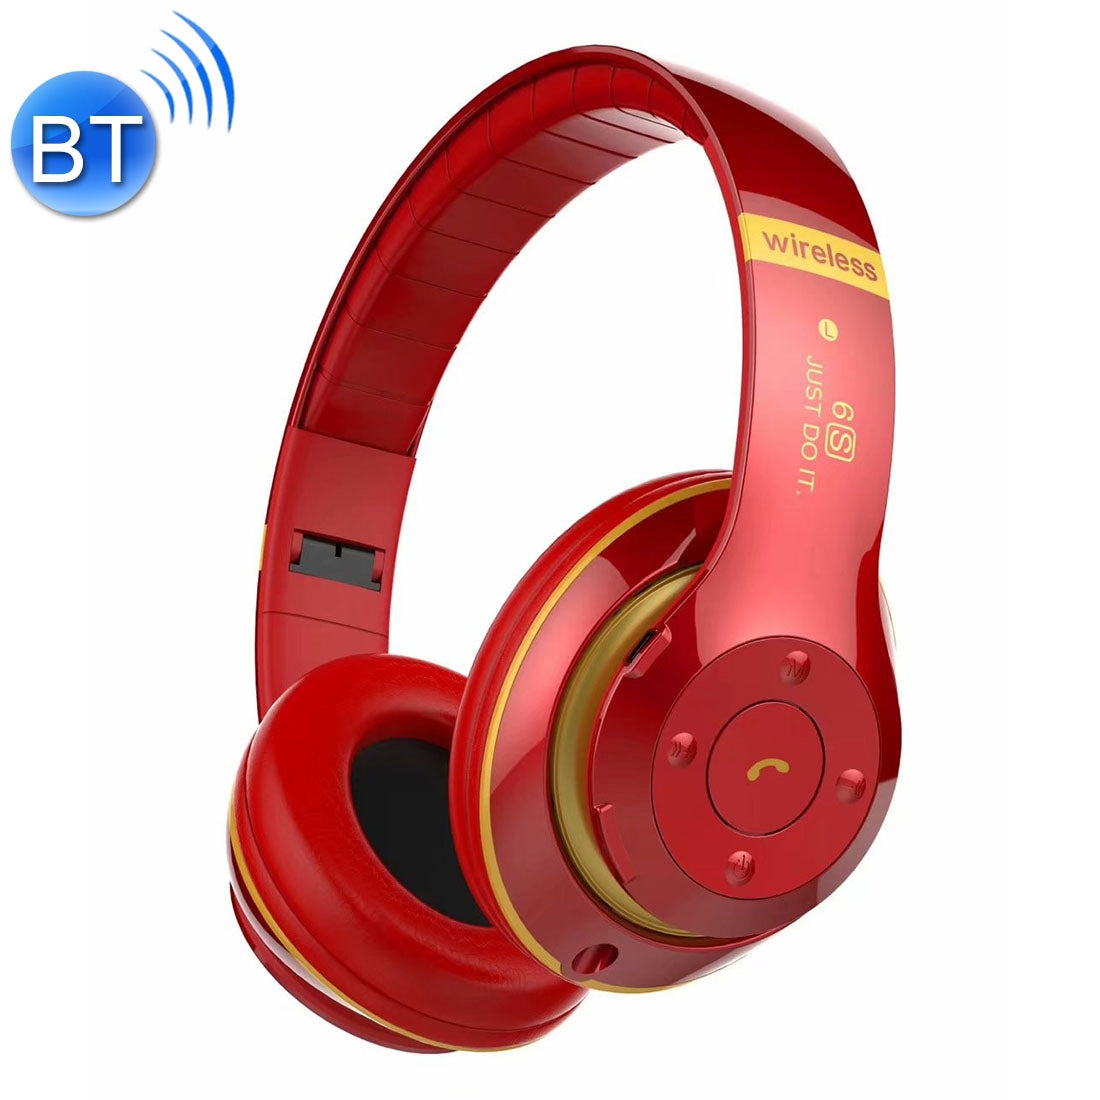 V30 Wireless Bluetooth 4.2 Headphone with Mic & FM & TF Card & Handfree Function, For iPhone, iPad, iPod, Samsung, HTC, Sony, Huawei, Xiaomi and other Audio Devices(Red)